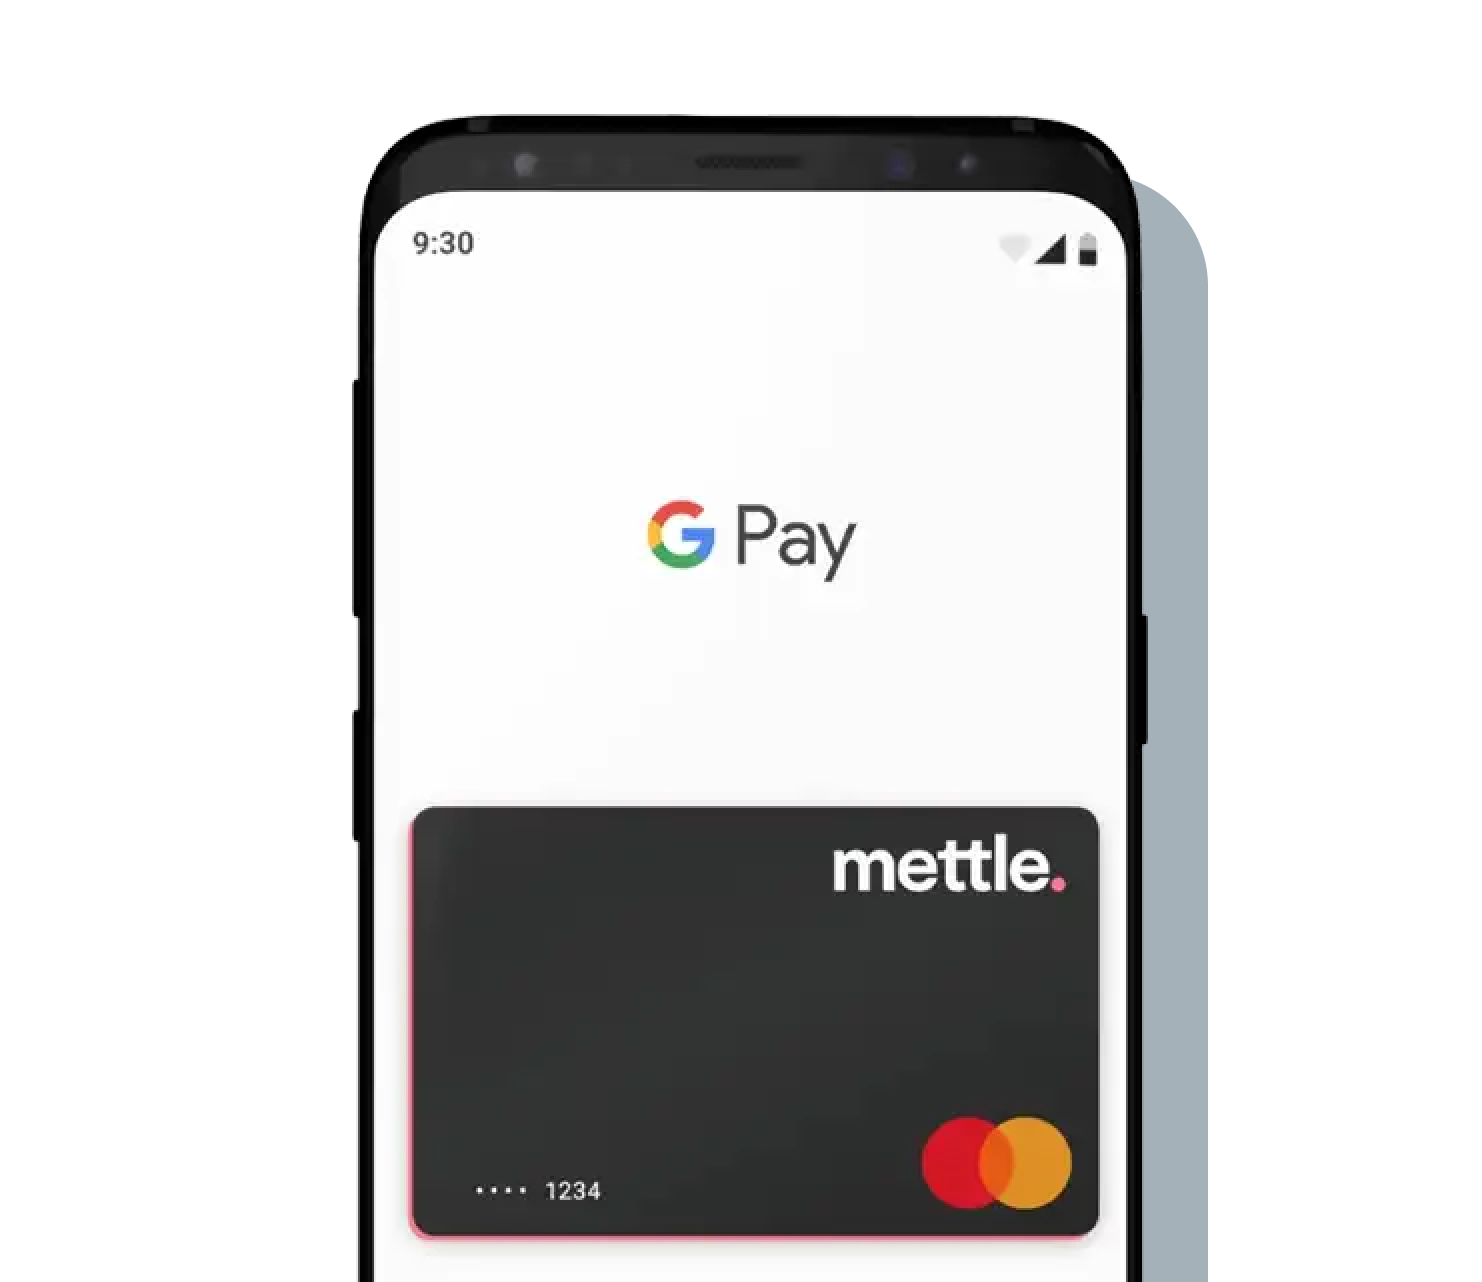 NEW: Easier payments with Google Pay